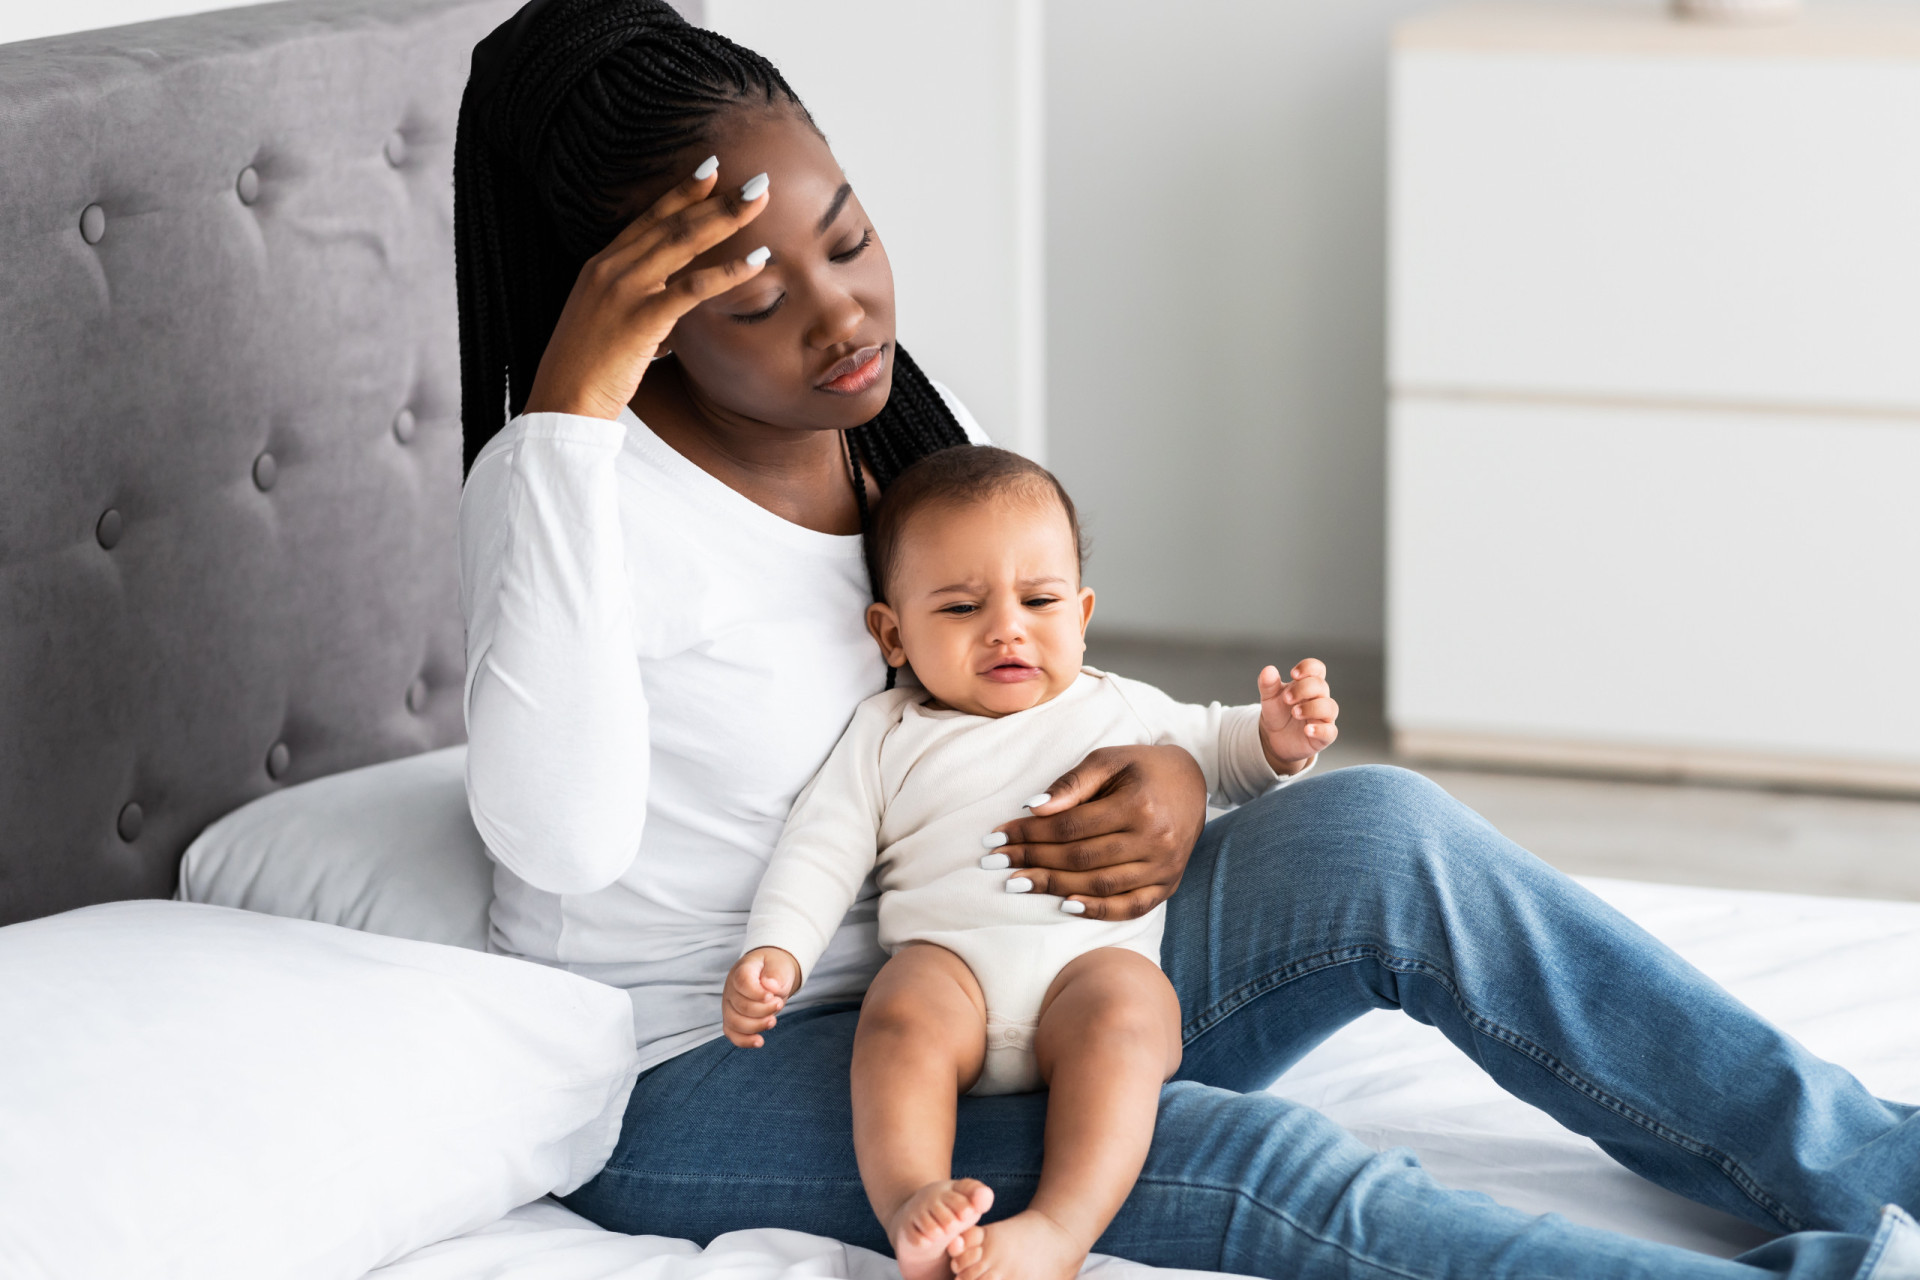 <p>While motherhood is an experience most women aspire to, the reality is that childcare can be tedious and repetitive. Craving adult conversation in a mature environment is a normal desire, but not always possible or convenient.</p><p><a href="https://www.msn.com/en-us/community/channel/vid-7xx8mnucu55yw63we9va2gwr7uihbxwc68fxqp25x6tg4ftibpra?cvid=94631541bc0f4f89bfd59158d696ad7e">Follow us and access great exclusive content every day</a></p>